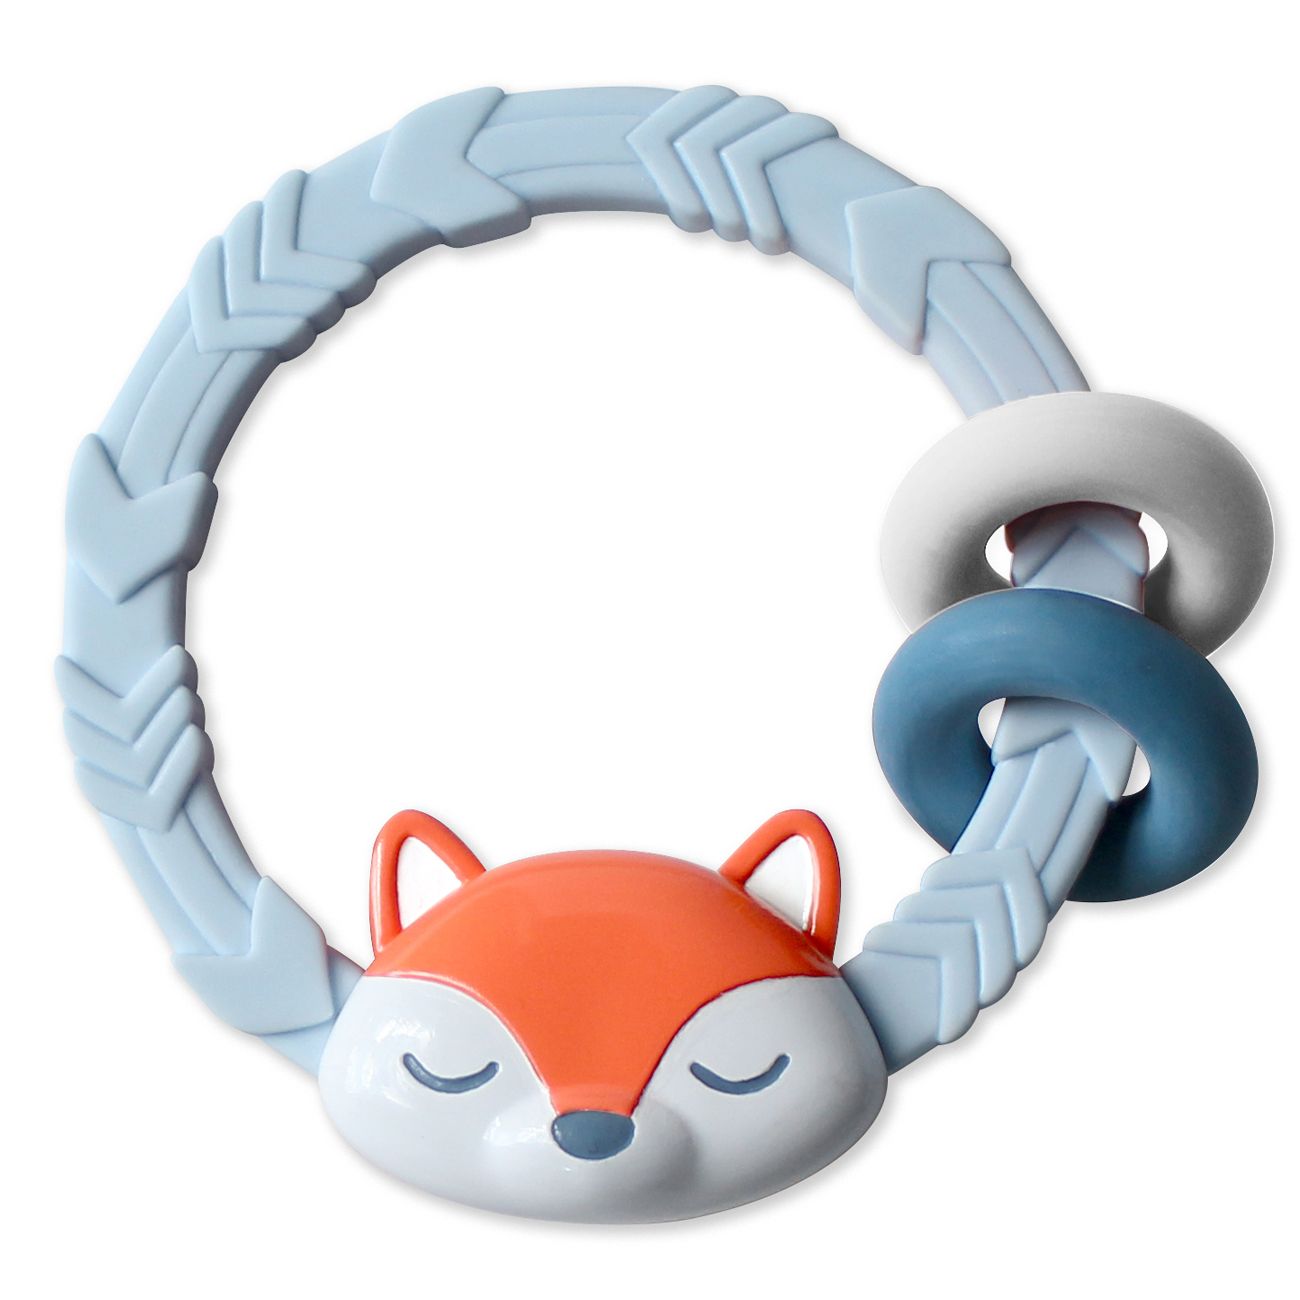 Itzy Ritzy Rattle Silicone Teether Rattles 固齒咬咬環 (Fox)